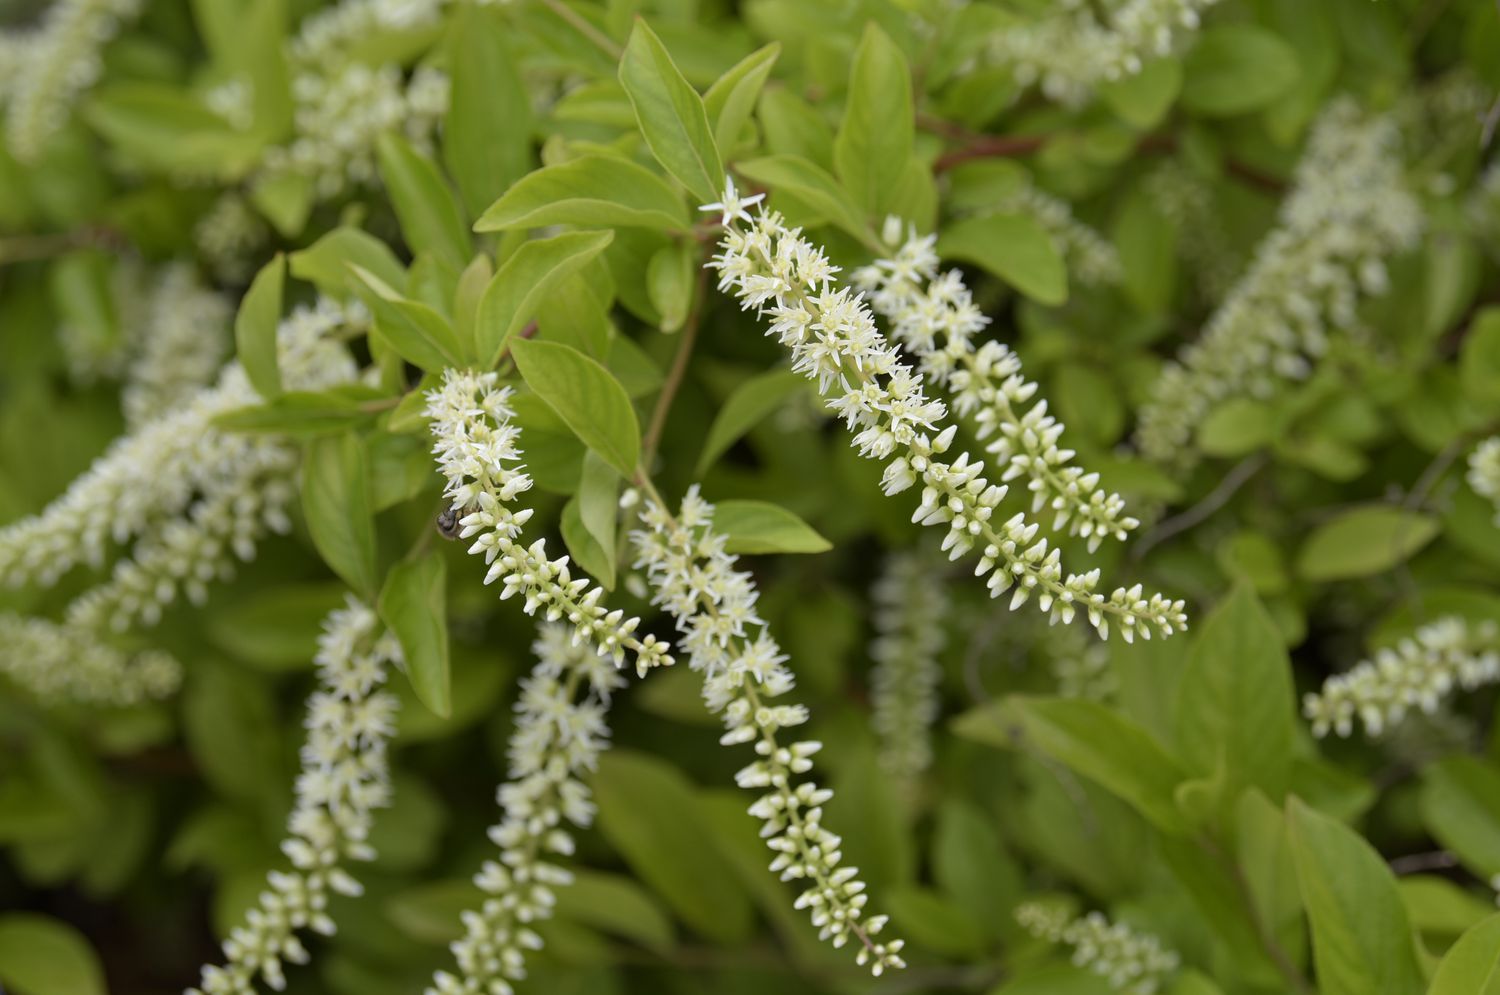 Virginia sweetspire plant with white cylindrical drooping flowers on end of branches closeup